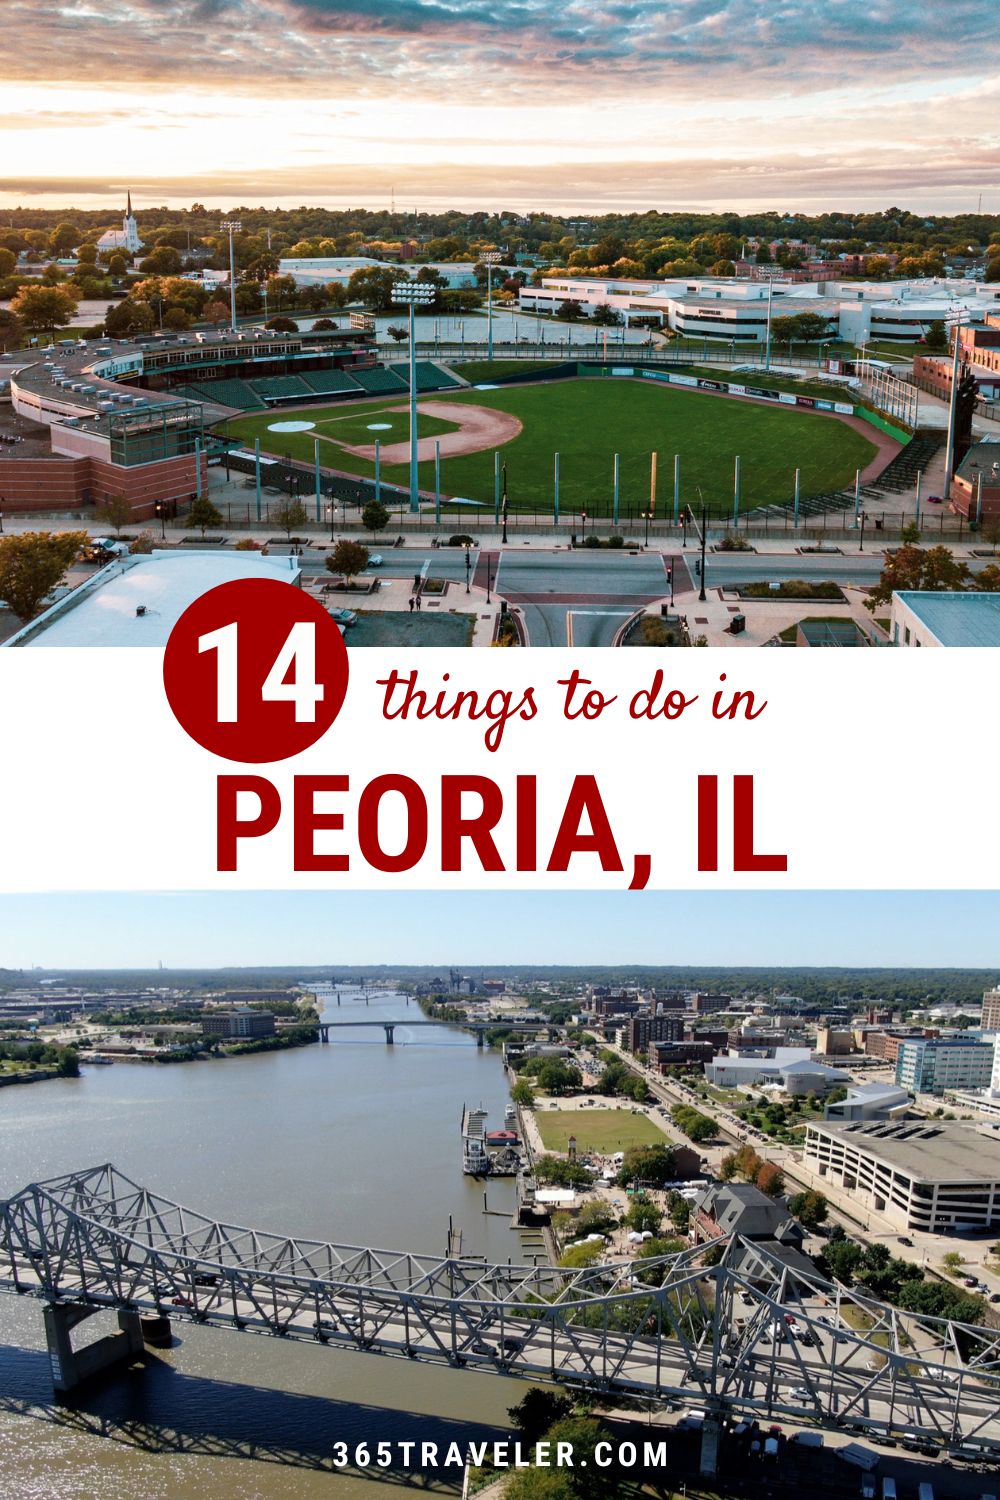 14 AMAZING THINGS TO DO IN PEORIA IL YOU'LL LOVE